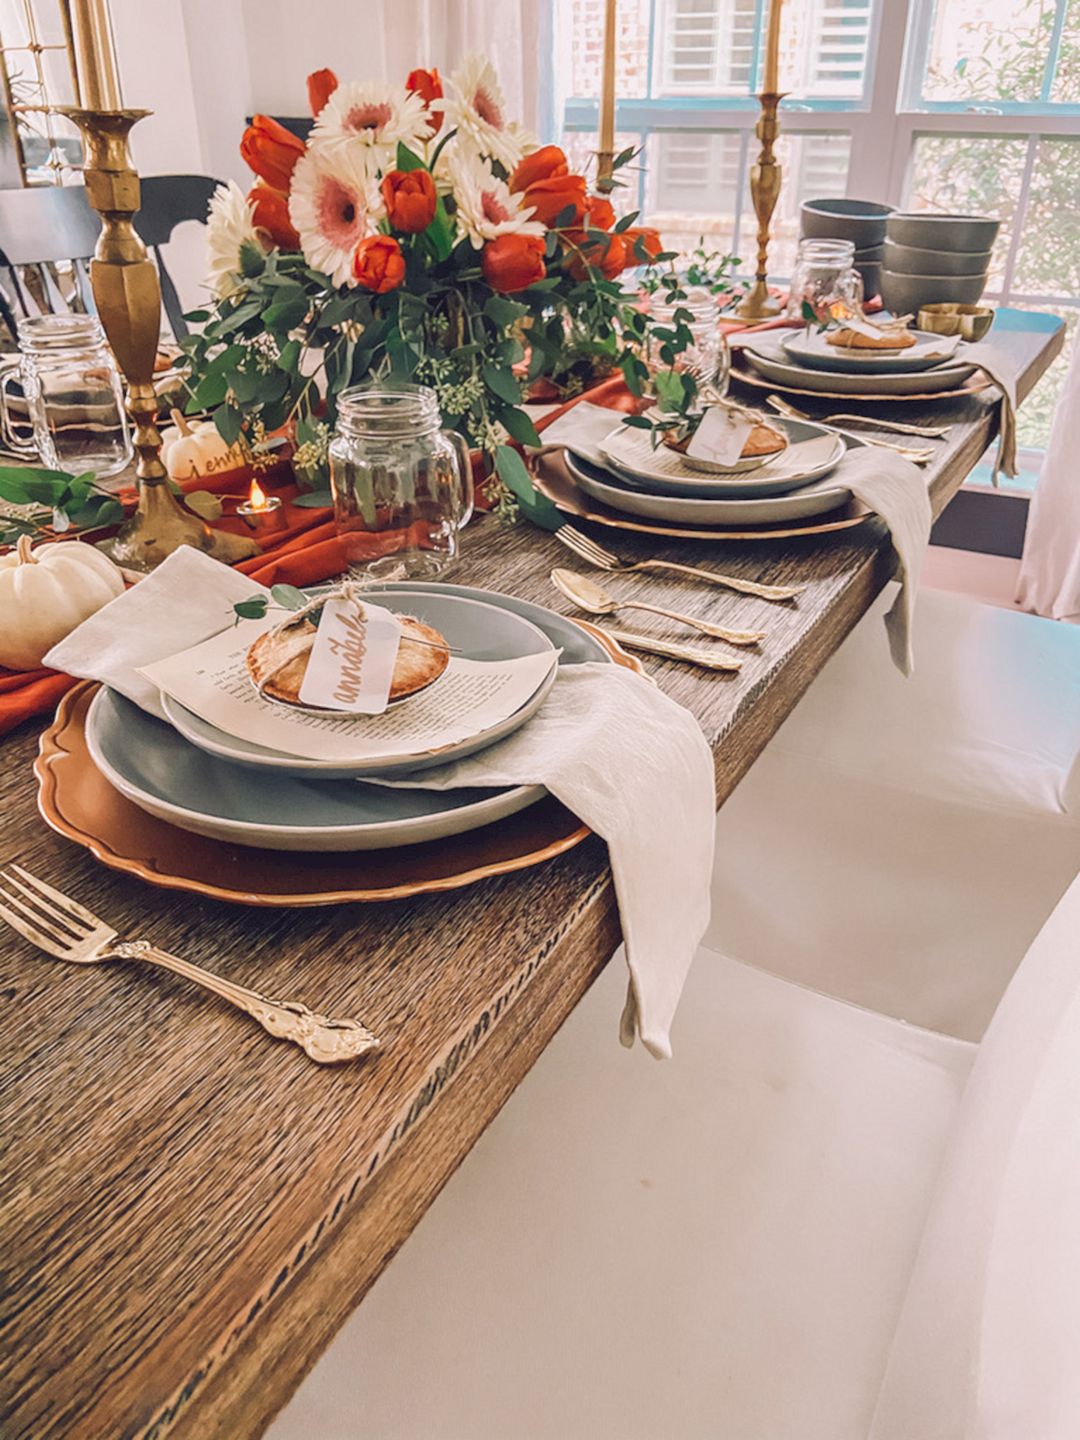 Thanksgiving Table Dishes And Glassware From Lifebyleanna